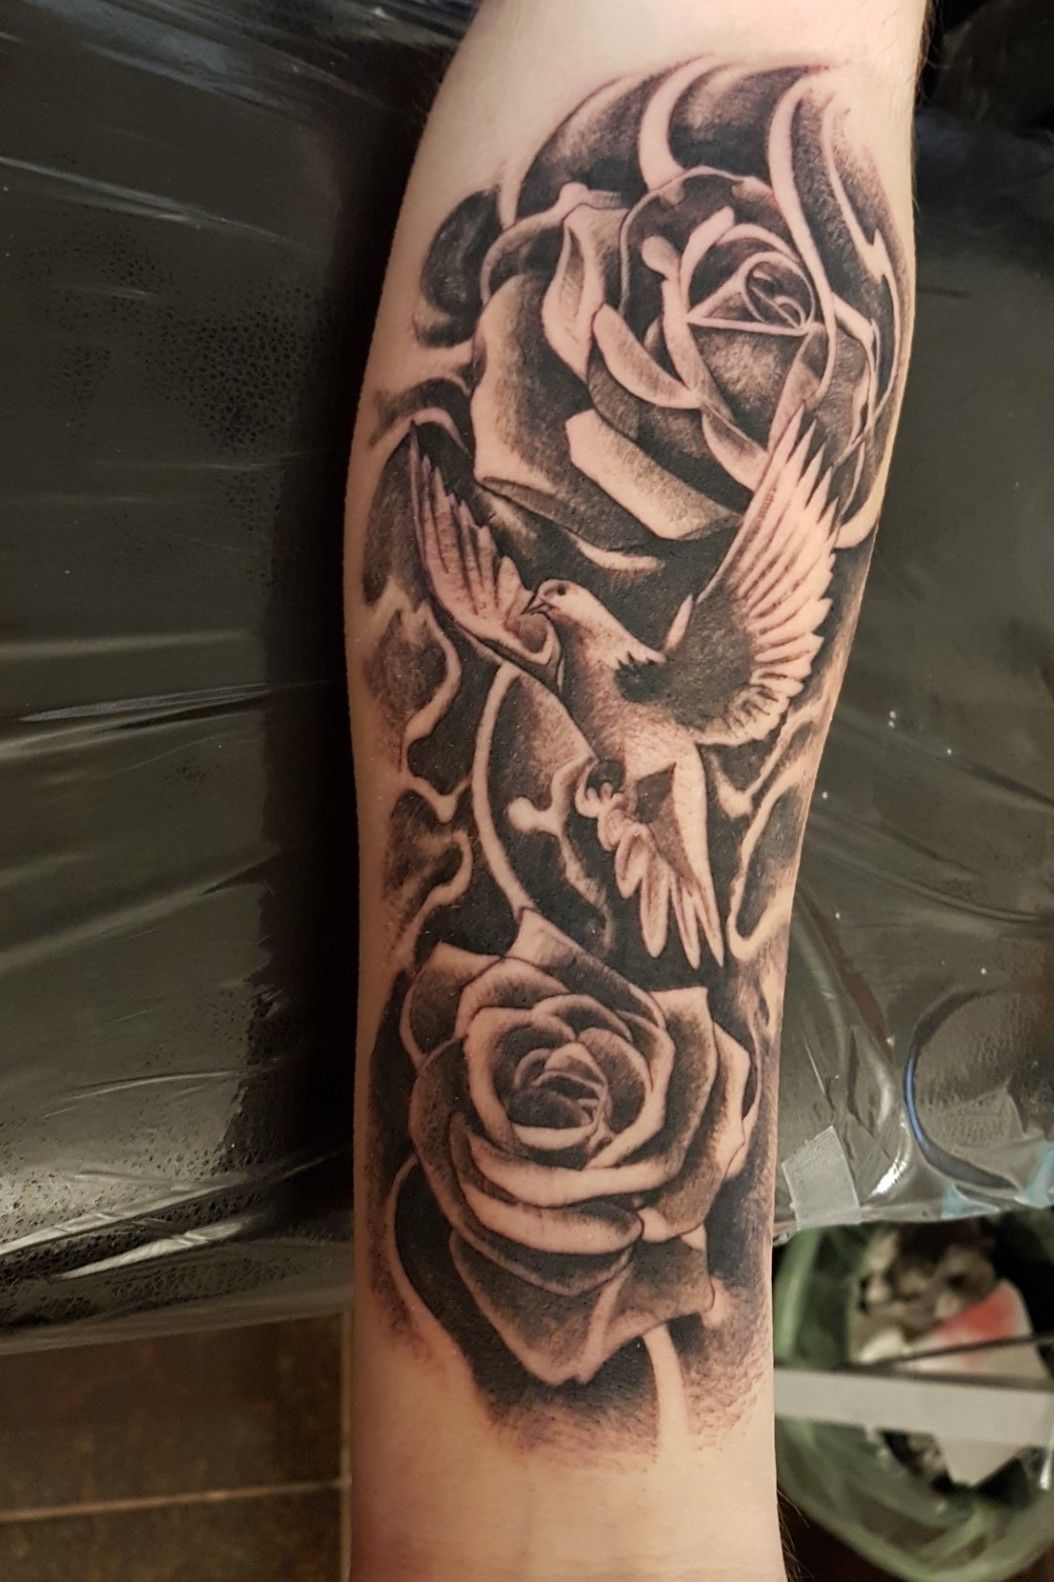 Roses and doves tattoo